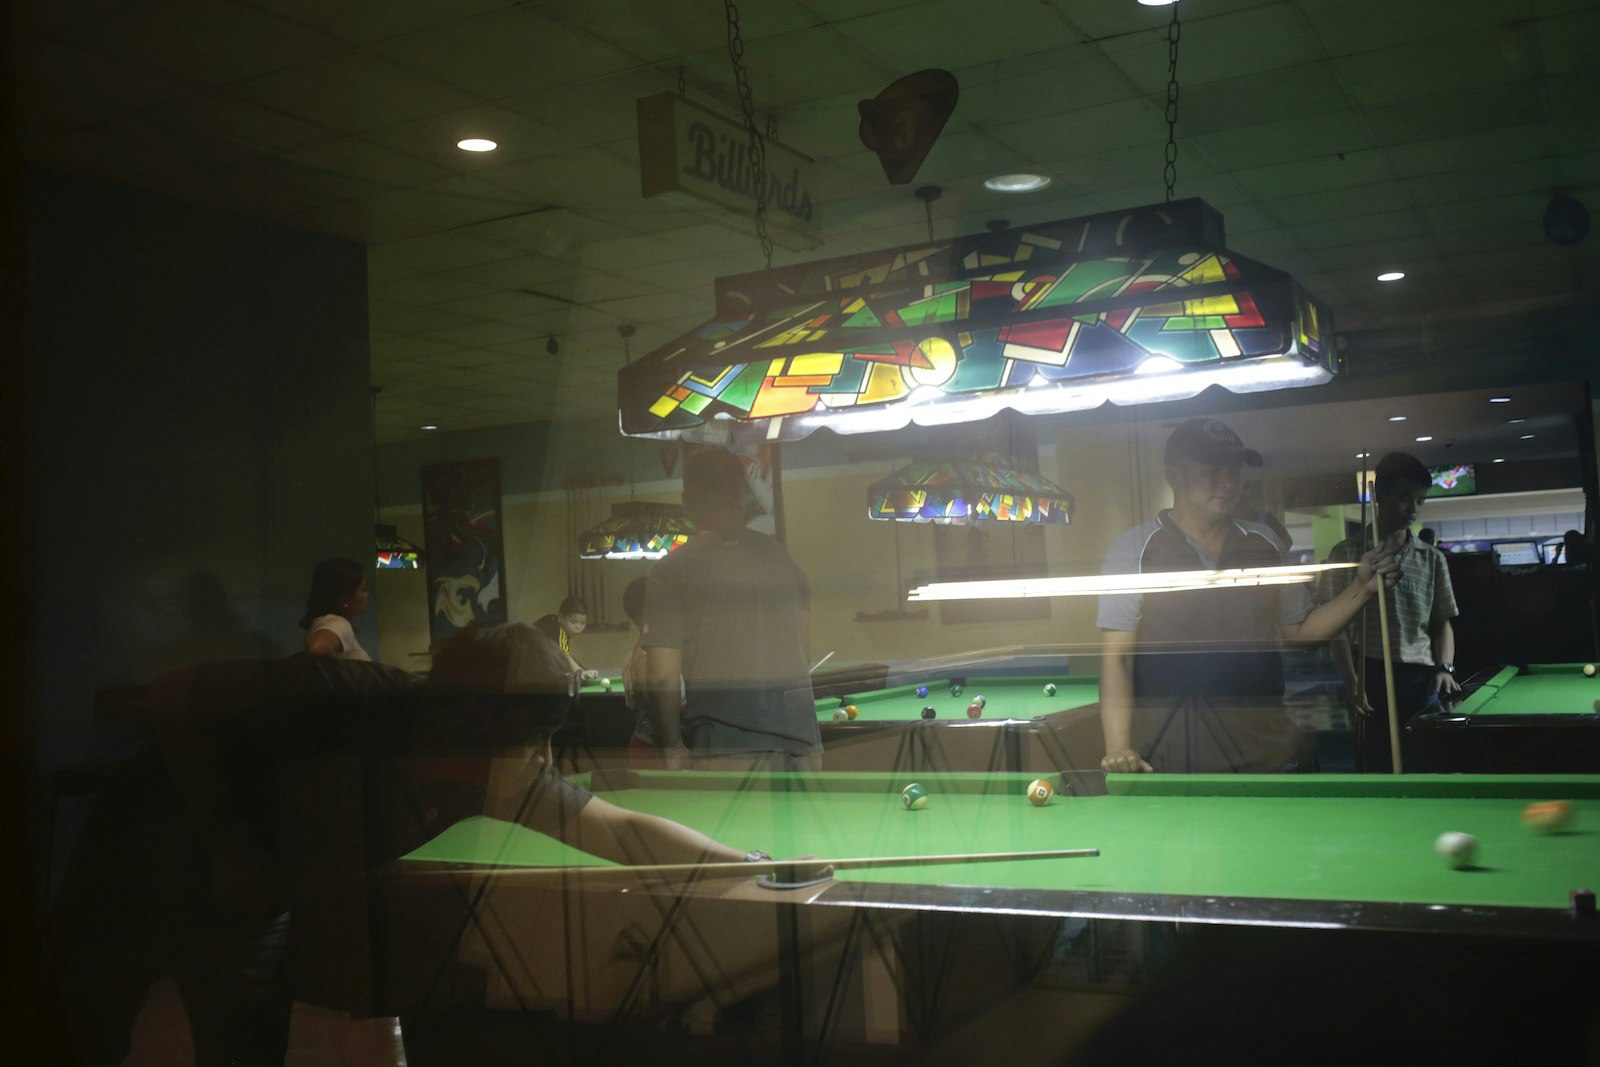 View through the window of men playing billiards, 80s decor inside